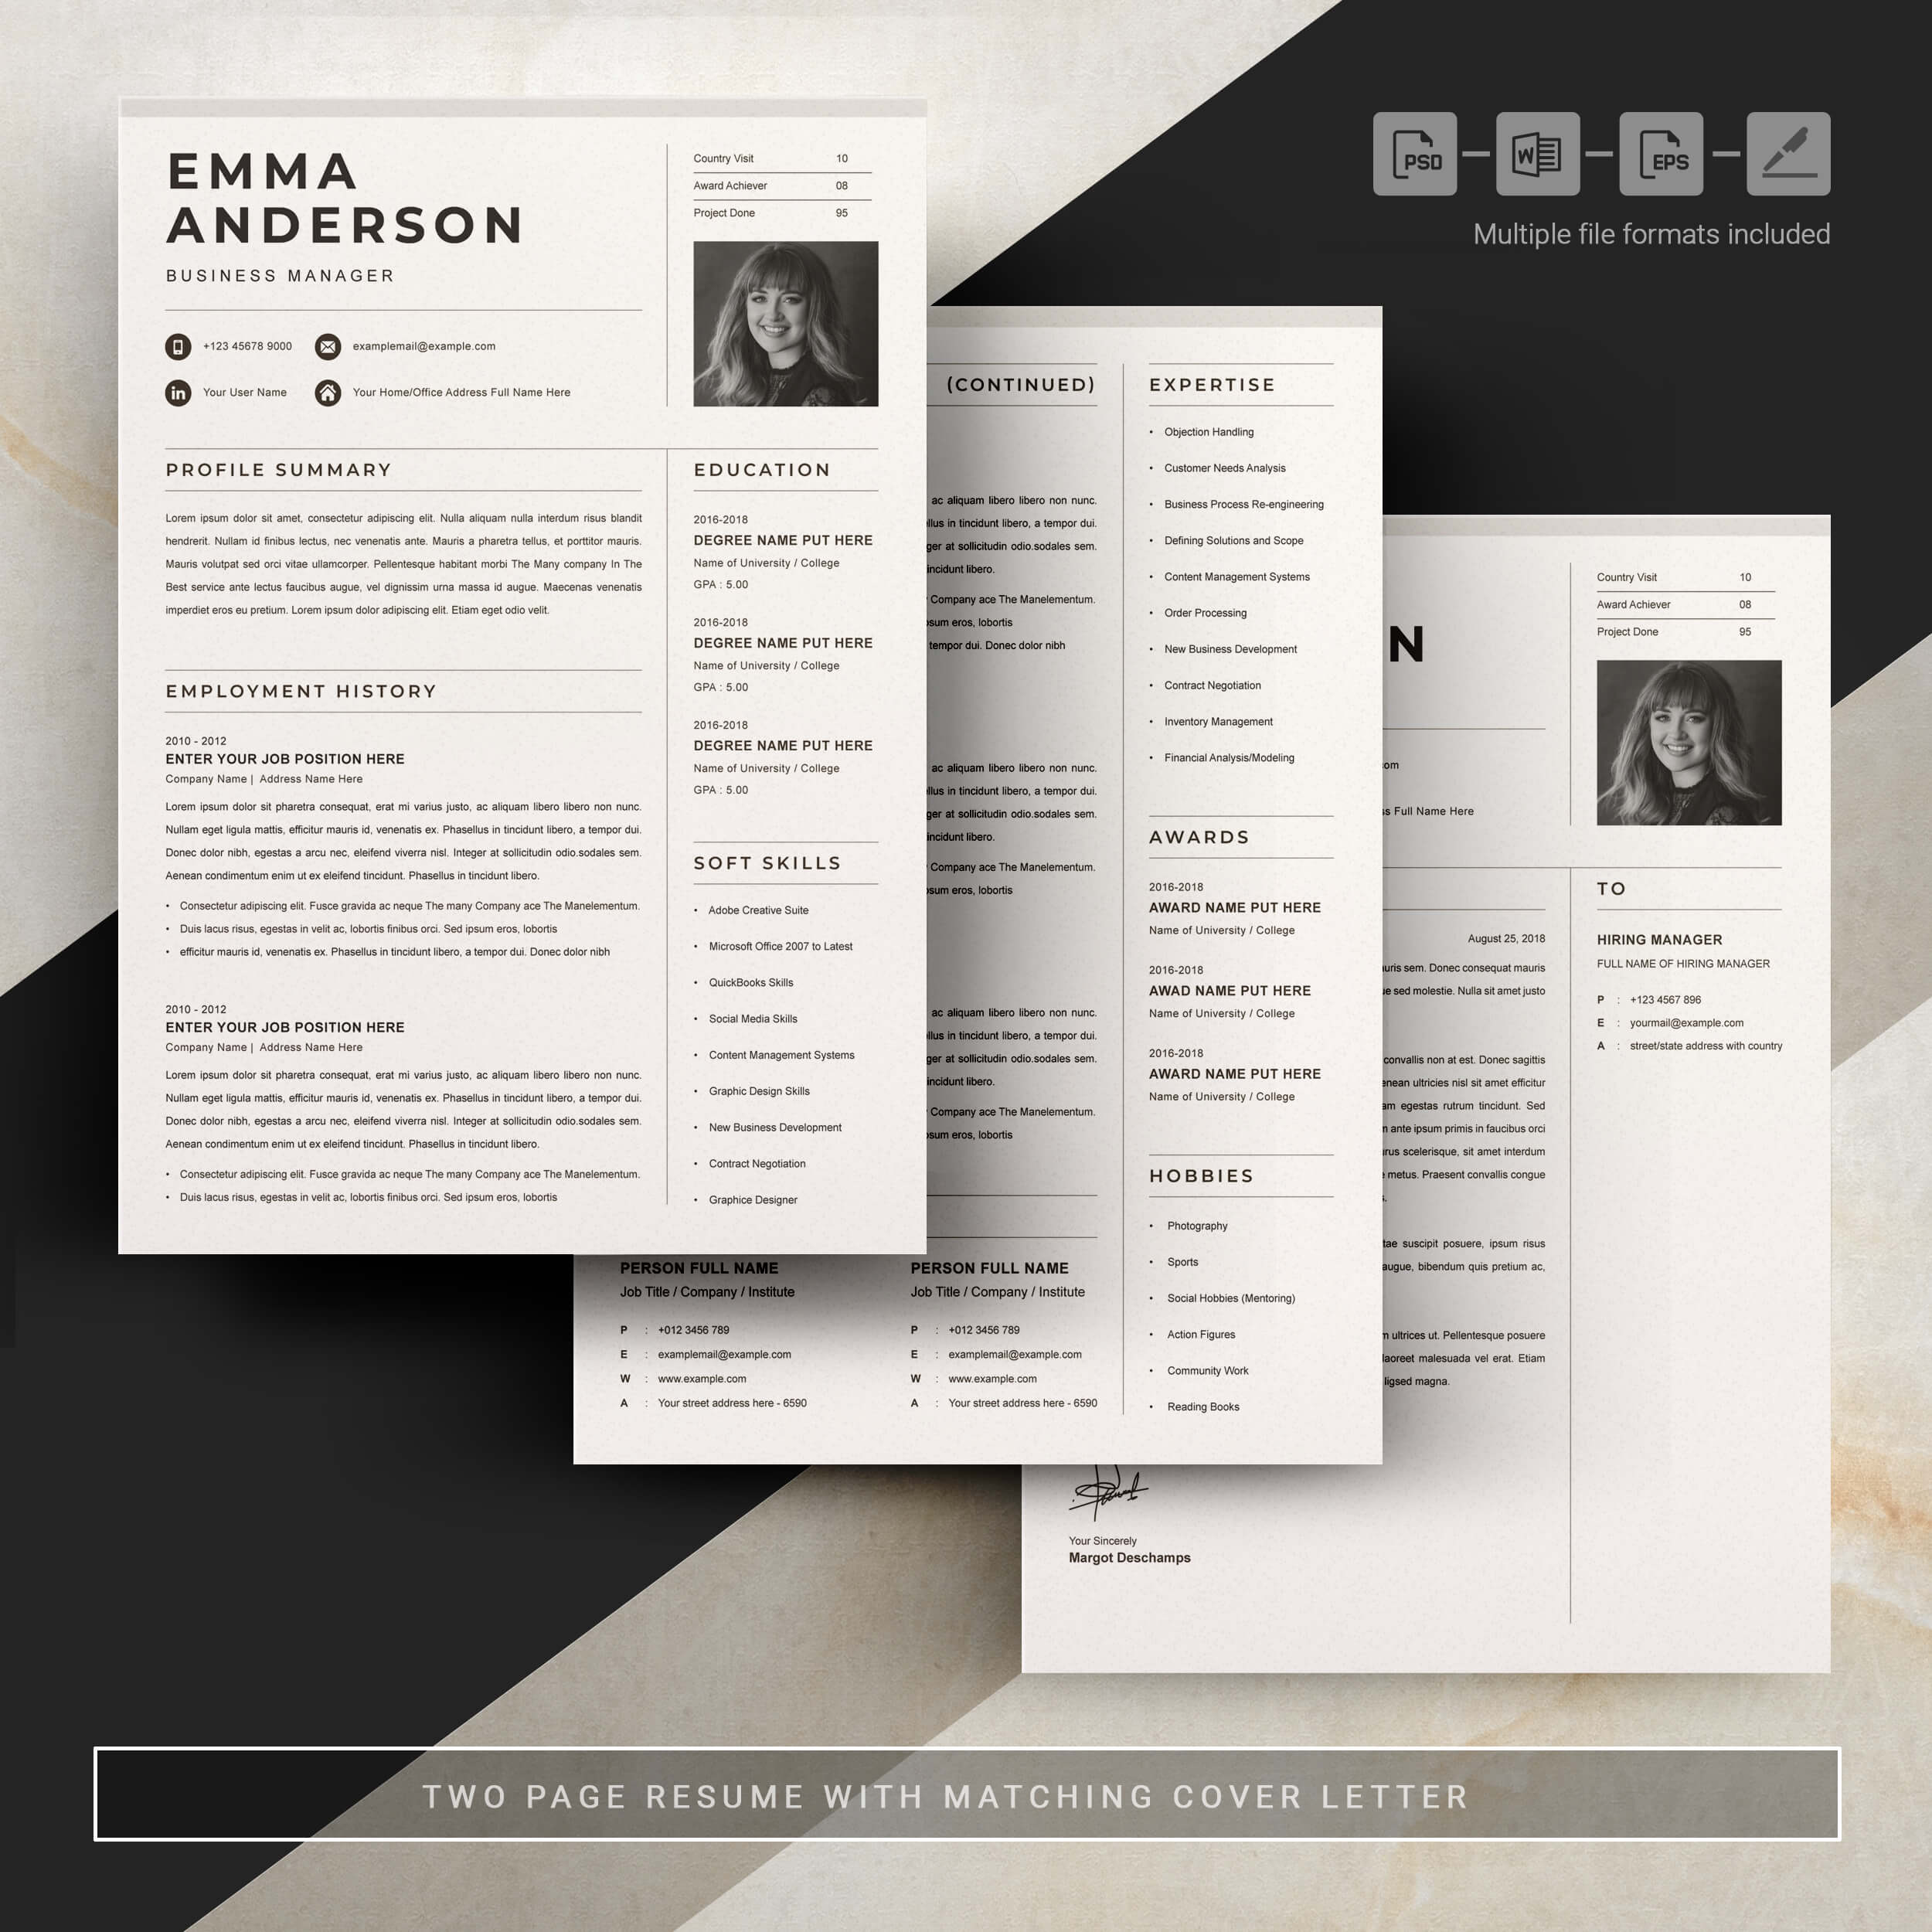 04 3 pages free resume design template 1 400